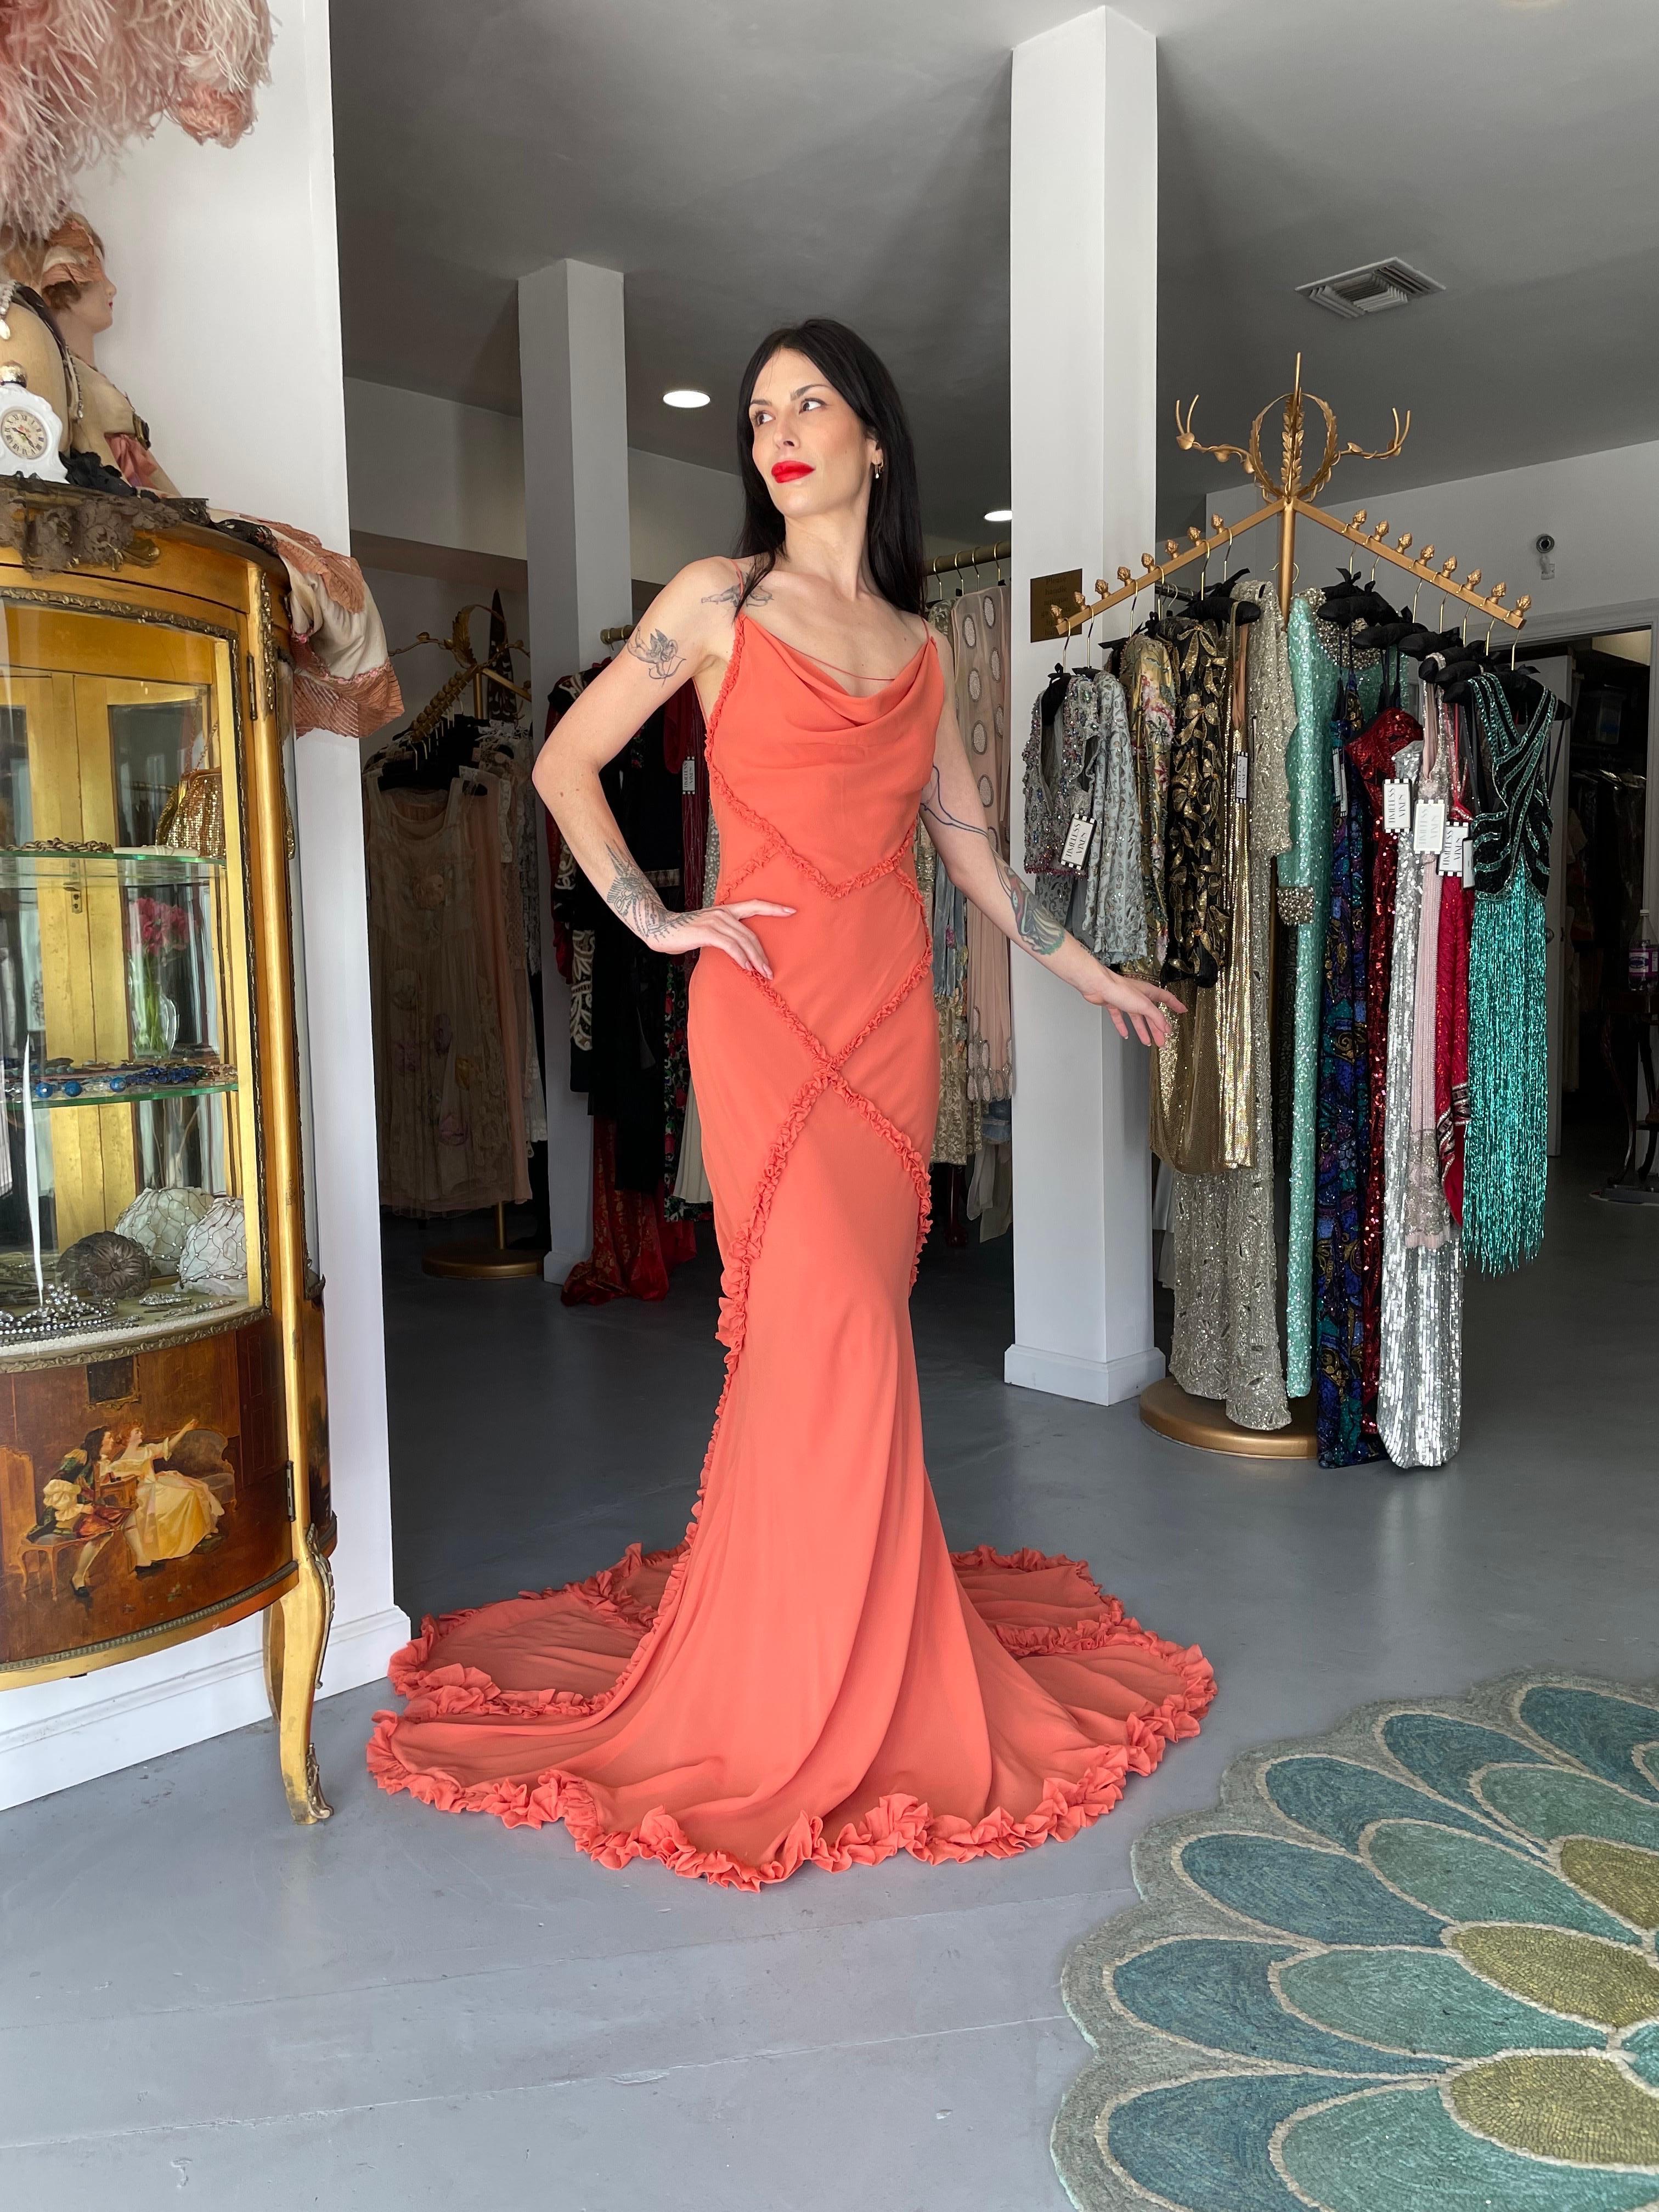 An absolutely sensational and highly coveted John Galliano vibrant coral pink silk chiffon bias-cut trained gown dating back to his 2008 spring/summer collection. These early examples of his work are very collectable and are becoming incredibly hard